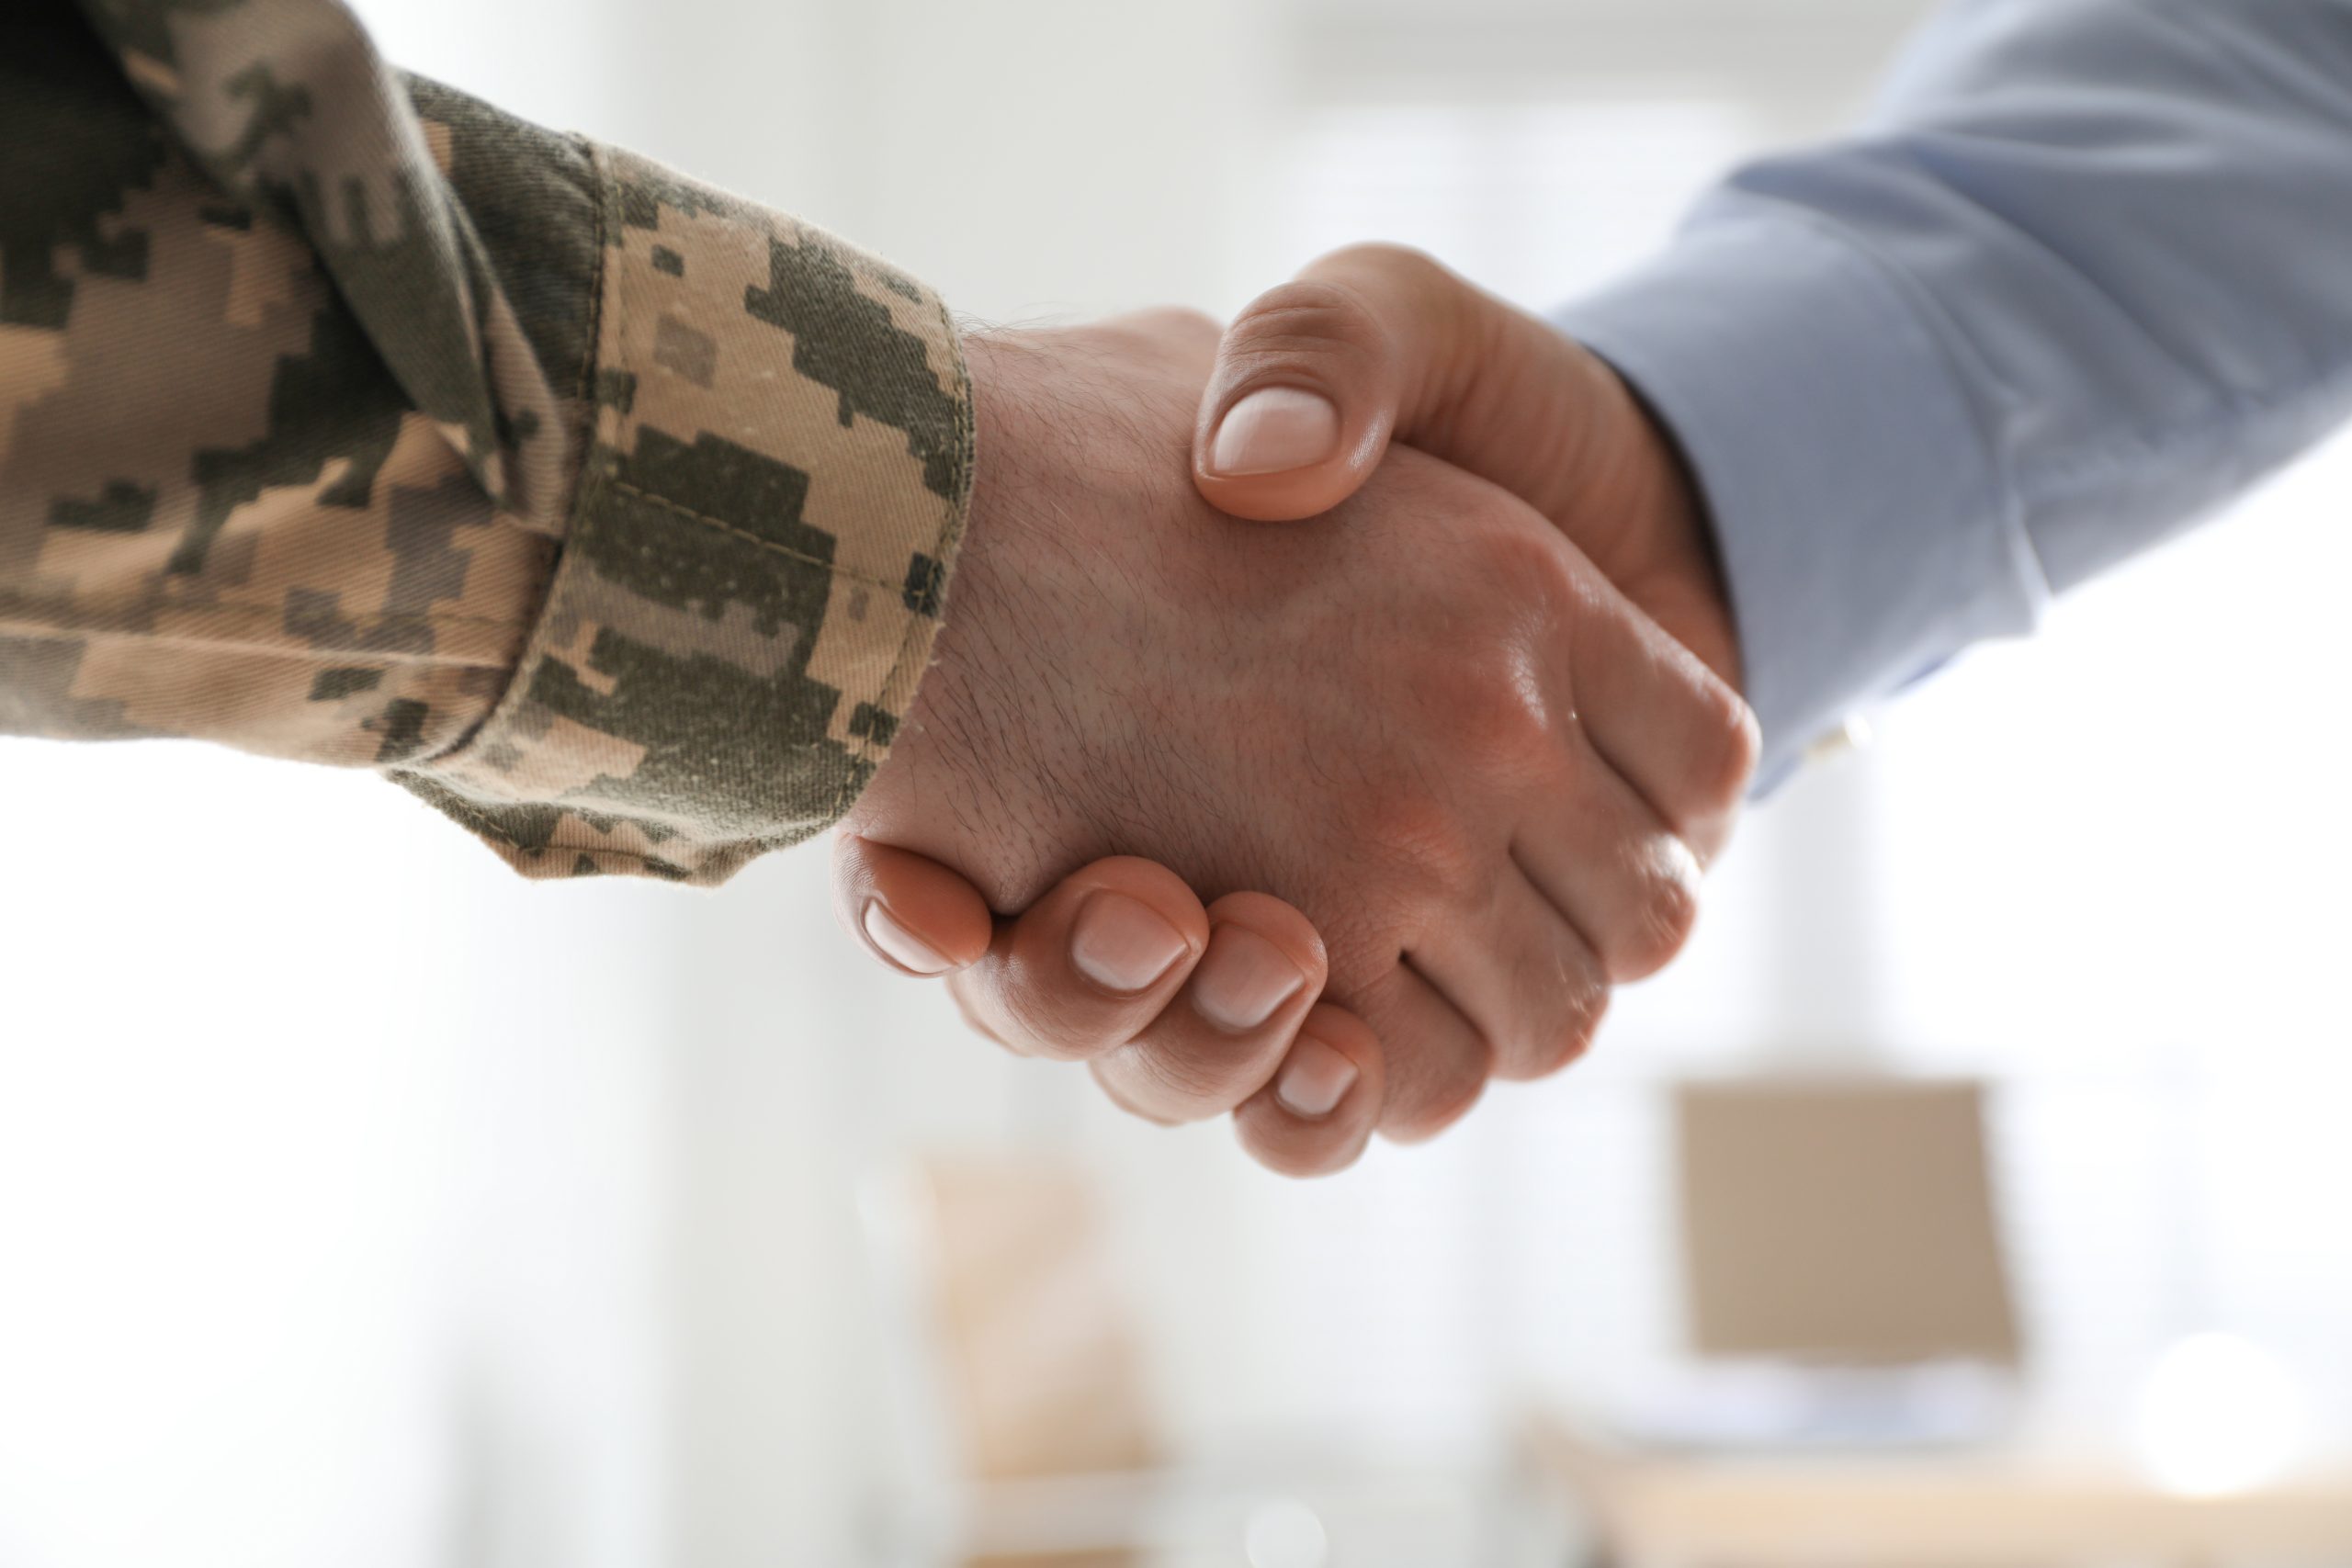 photo of a handshake between two hands, one in camouflage, representing veterans accessing mental health support services